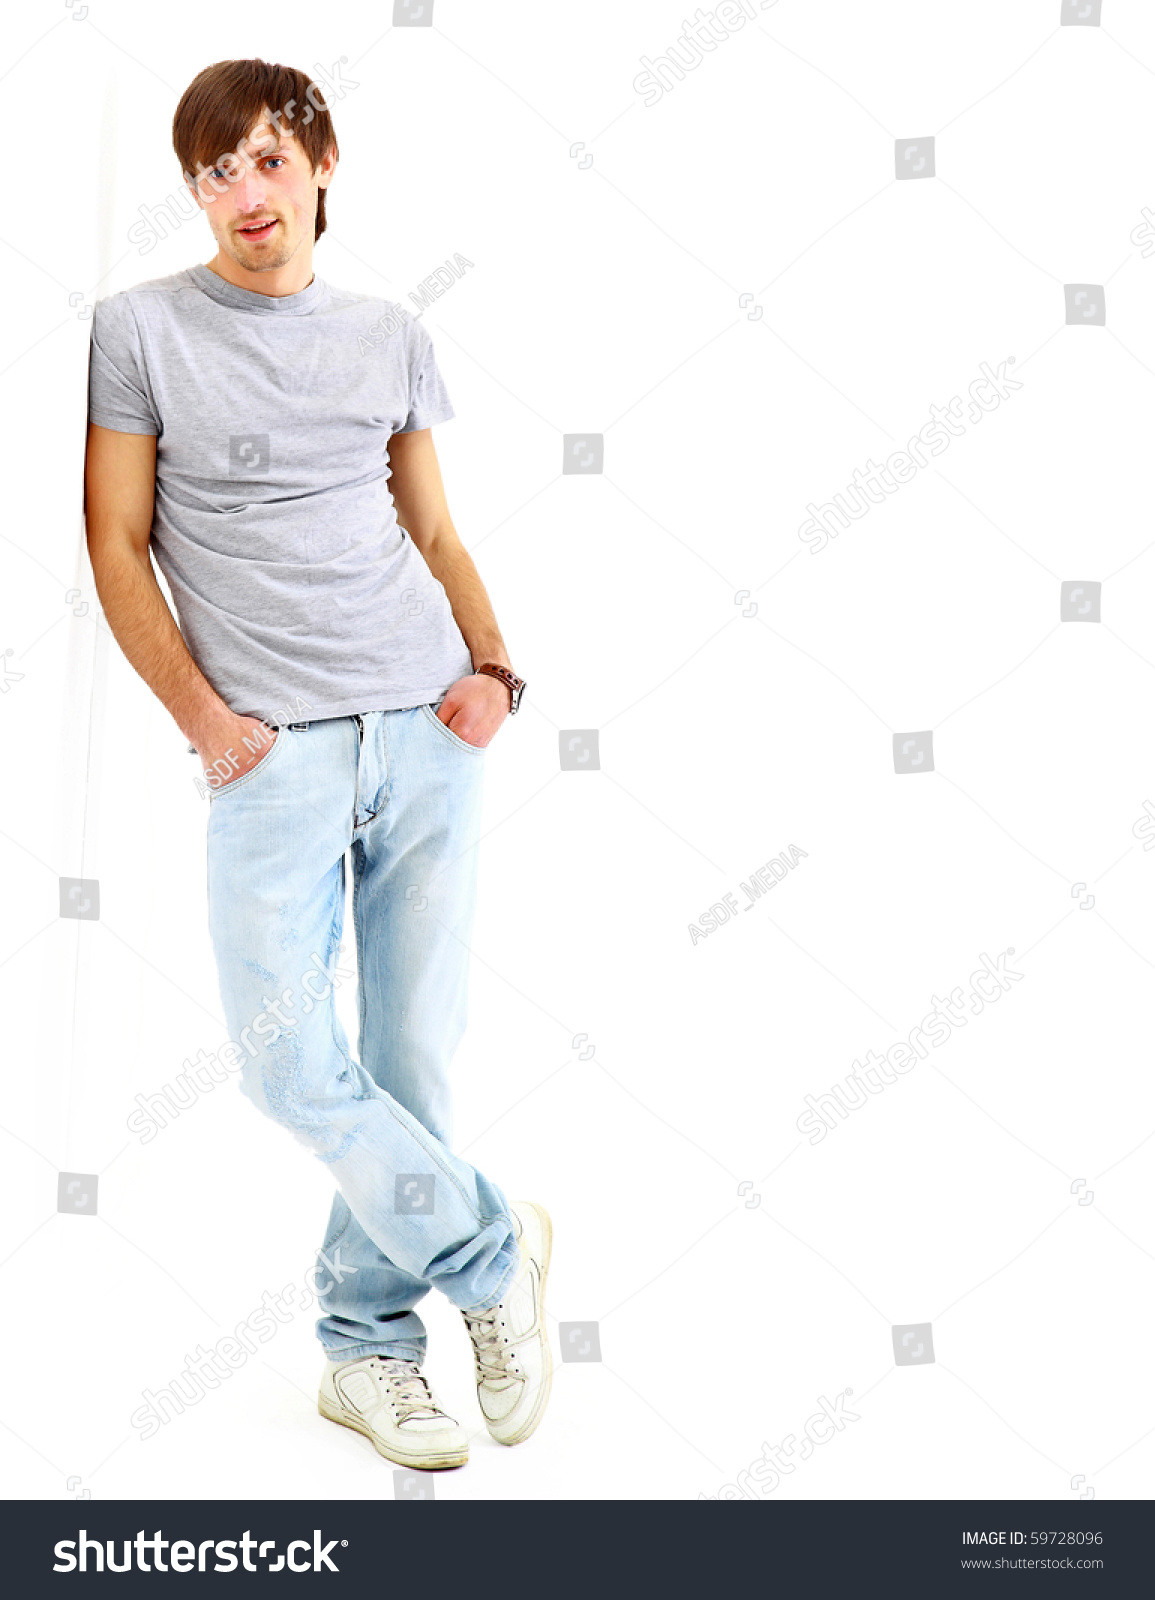 Young Man Isolated On White Background Stock Photo 59728096 : Shutterstock